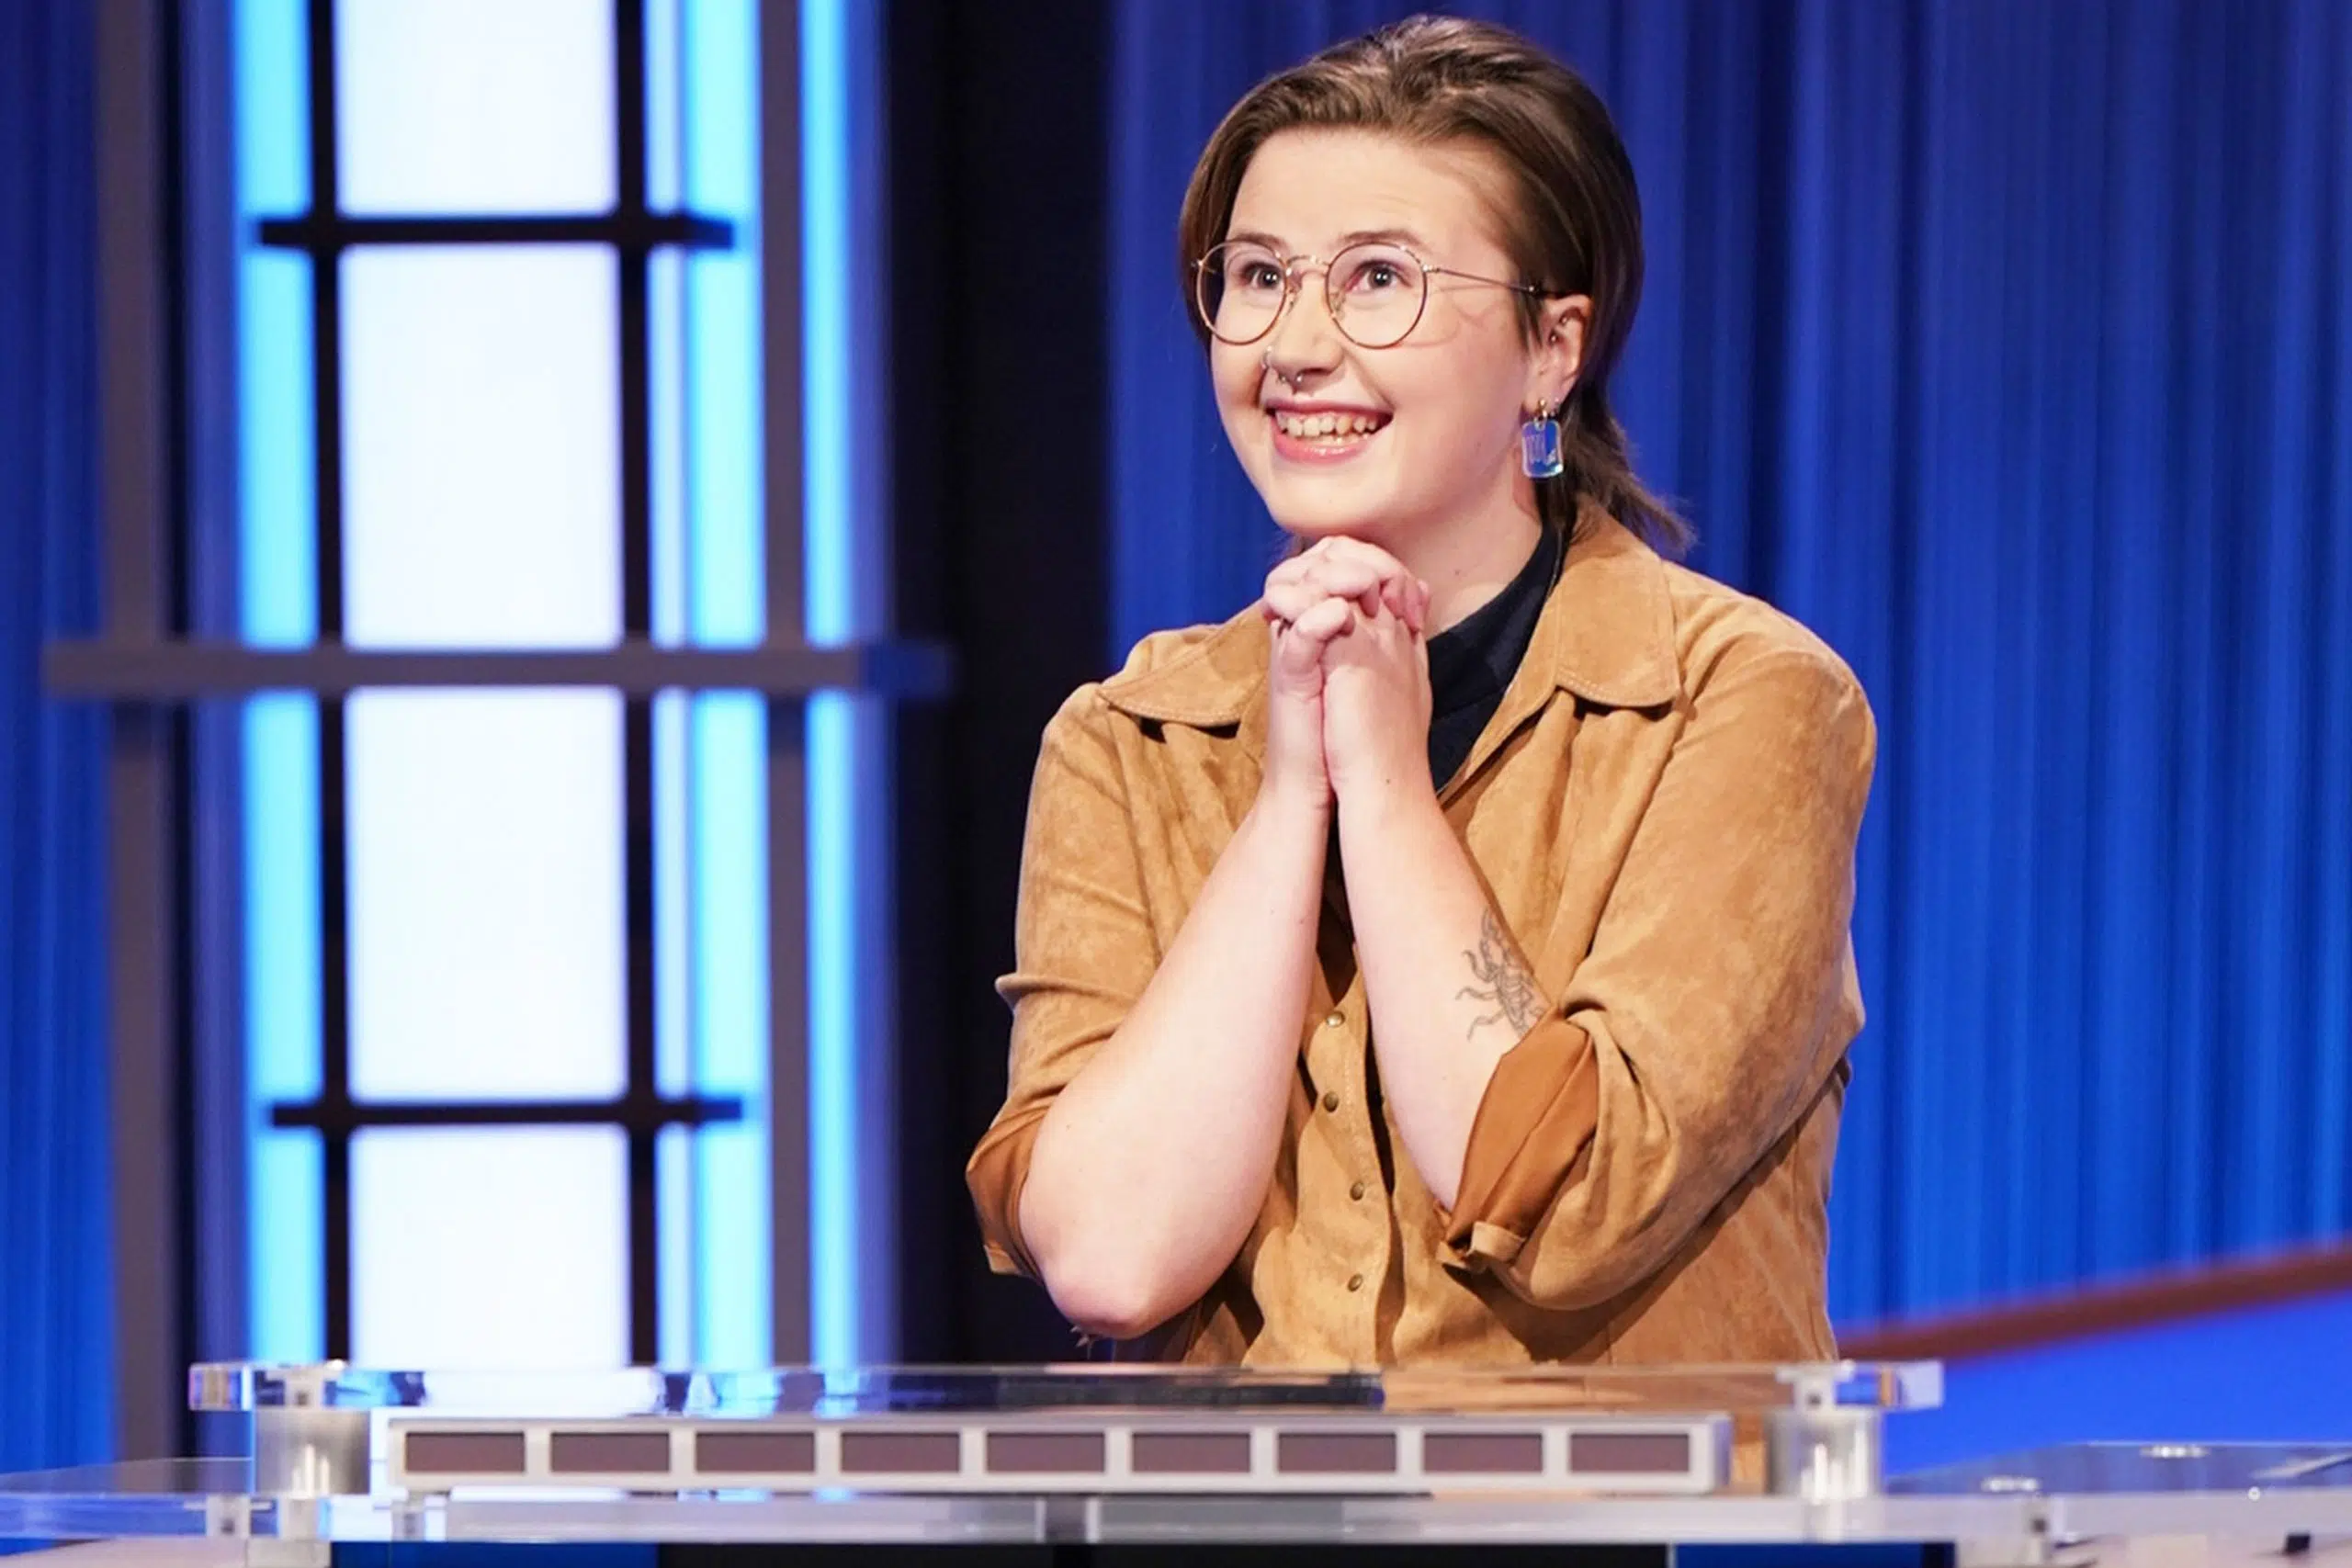 Canadian Mattea Roach will return to "Jeopardy!" for Tournament of Champions